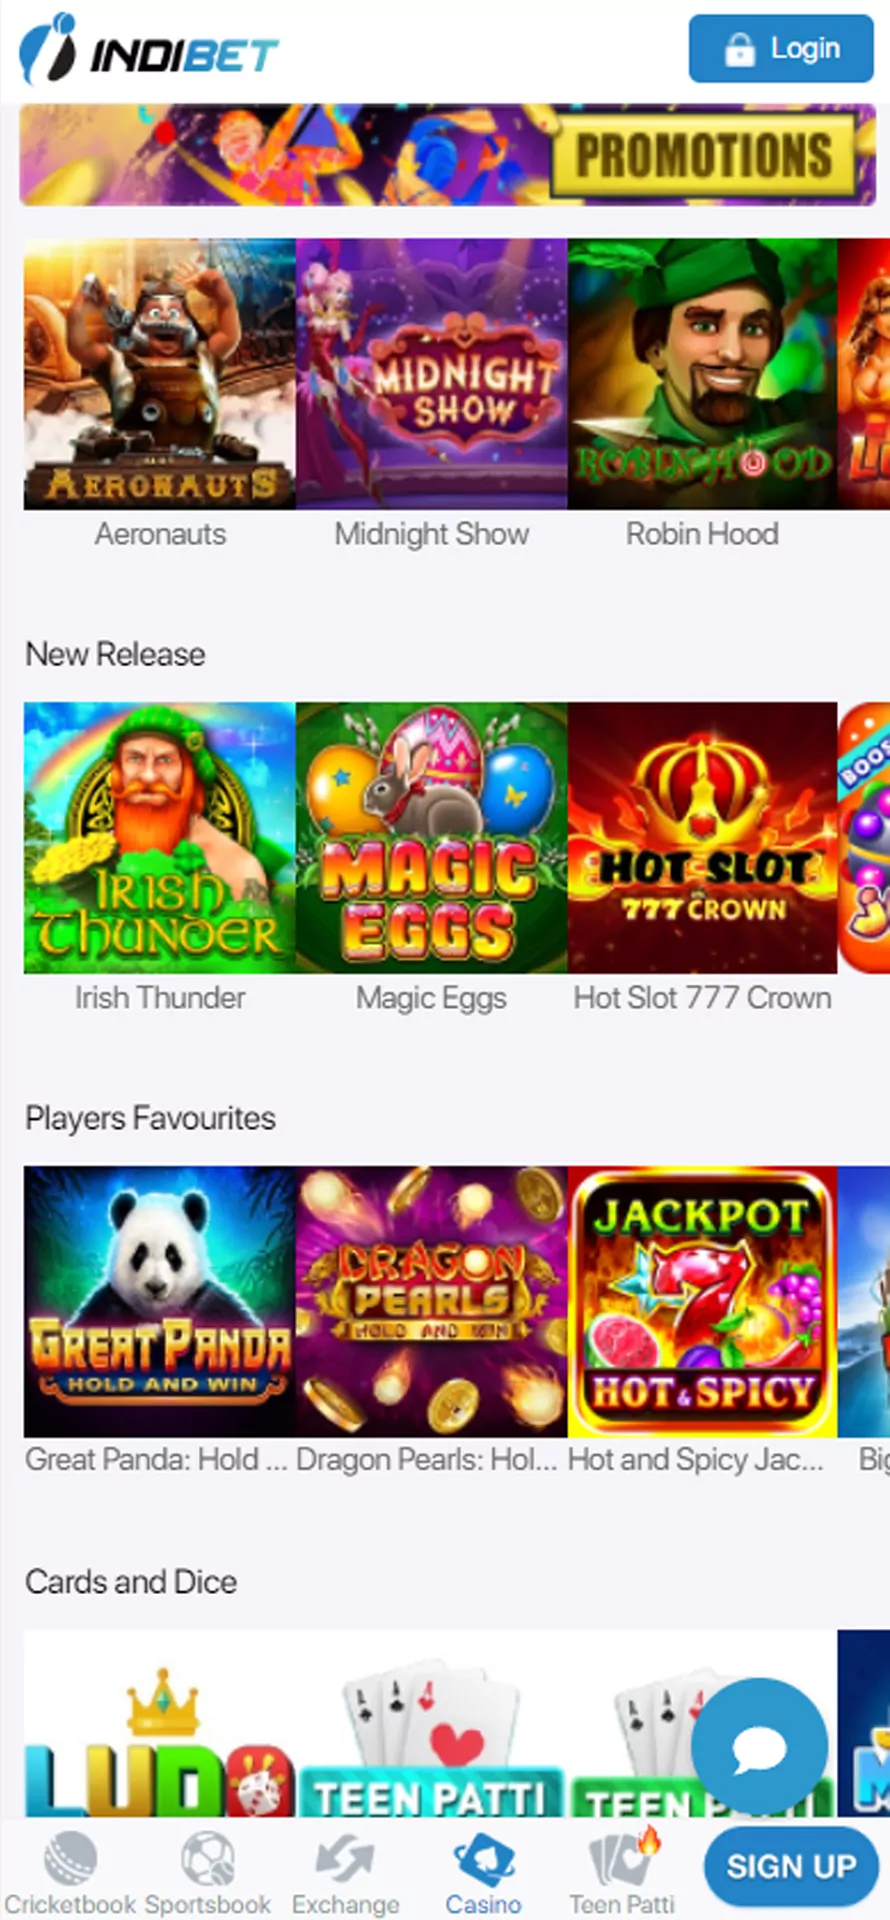 Spin in slots at Indibet and win money.